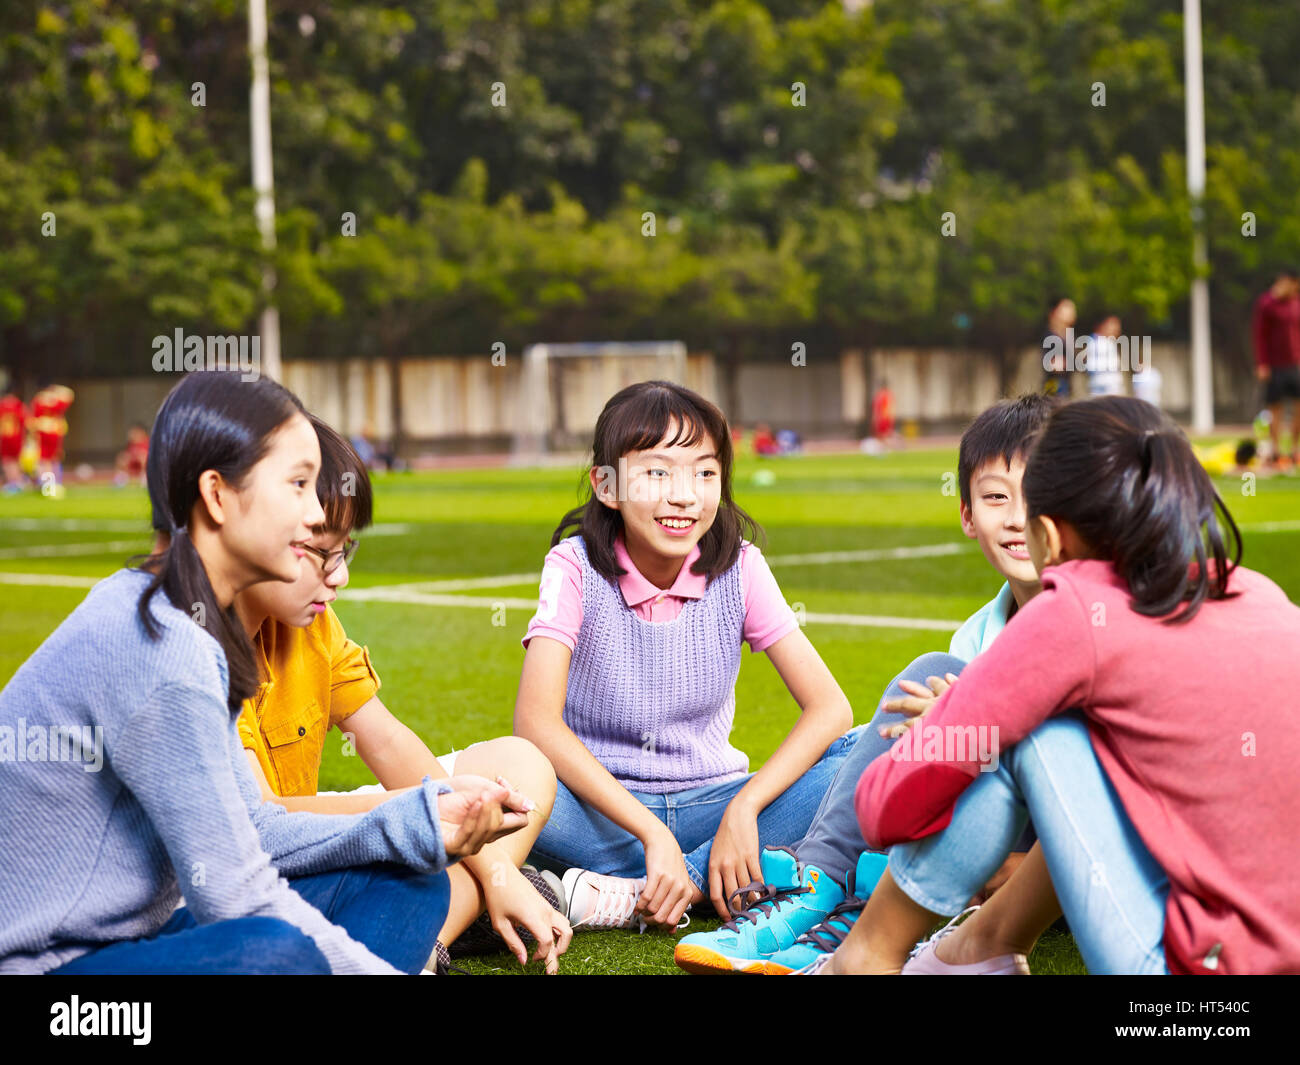 group of asian elementary school boys and girls sitting and chatting on playground grass Stock Photo